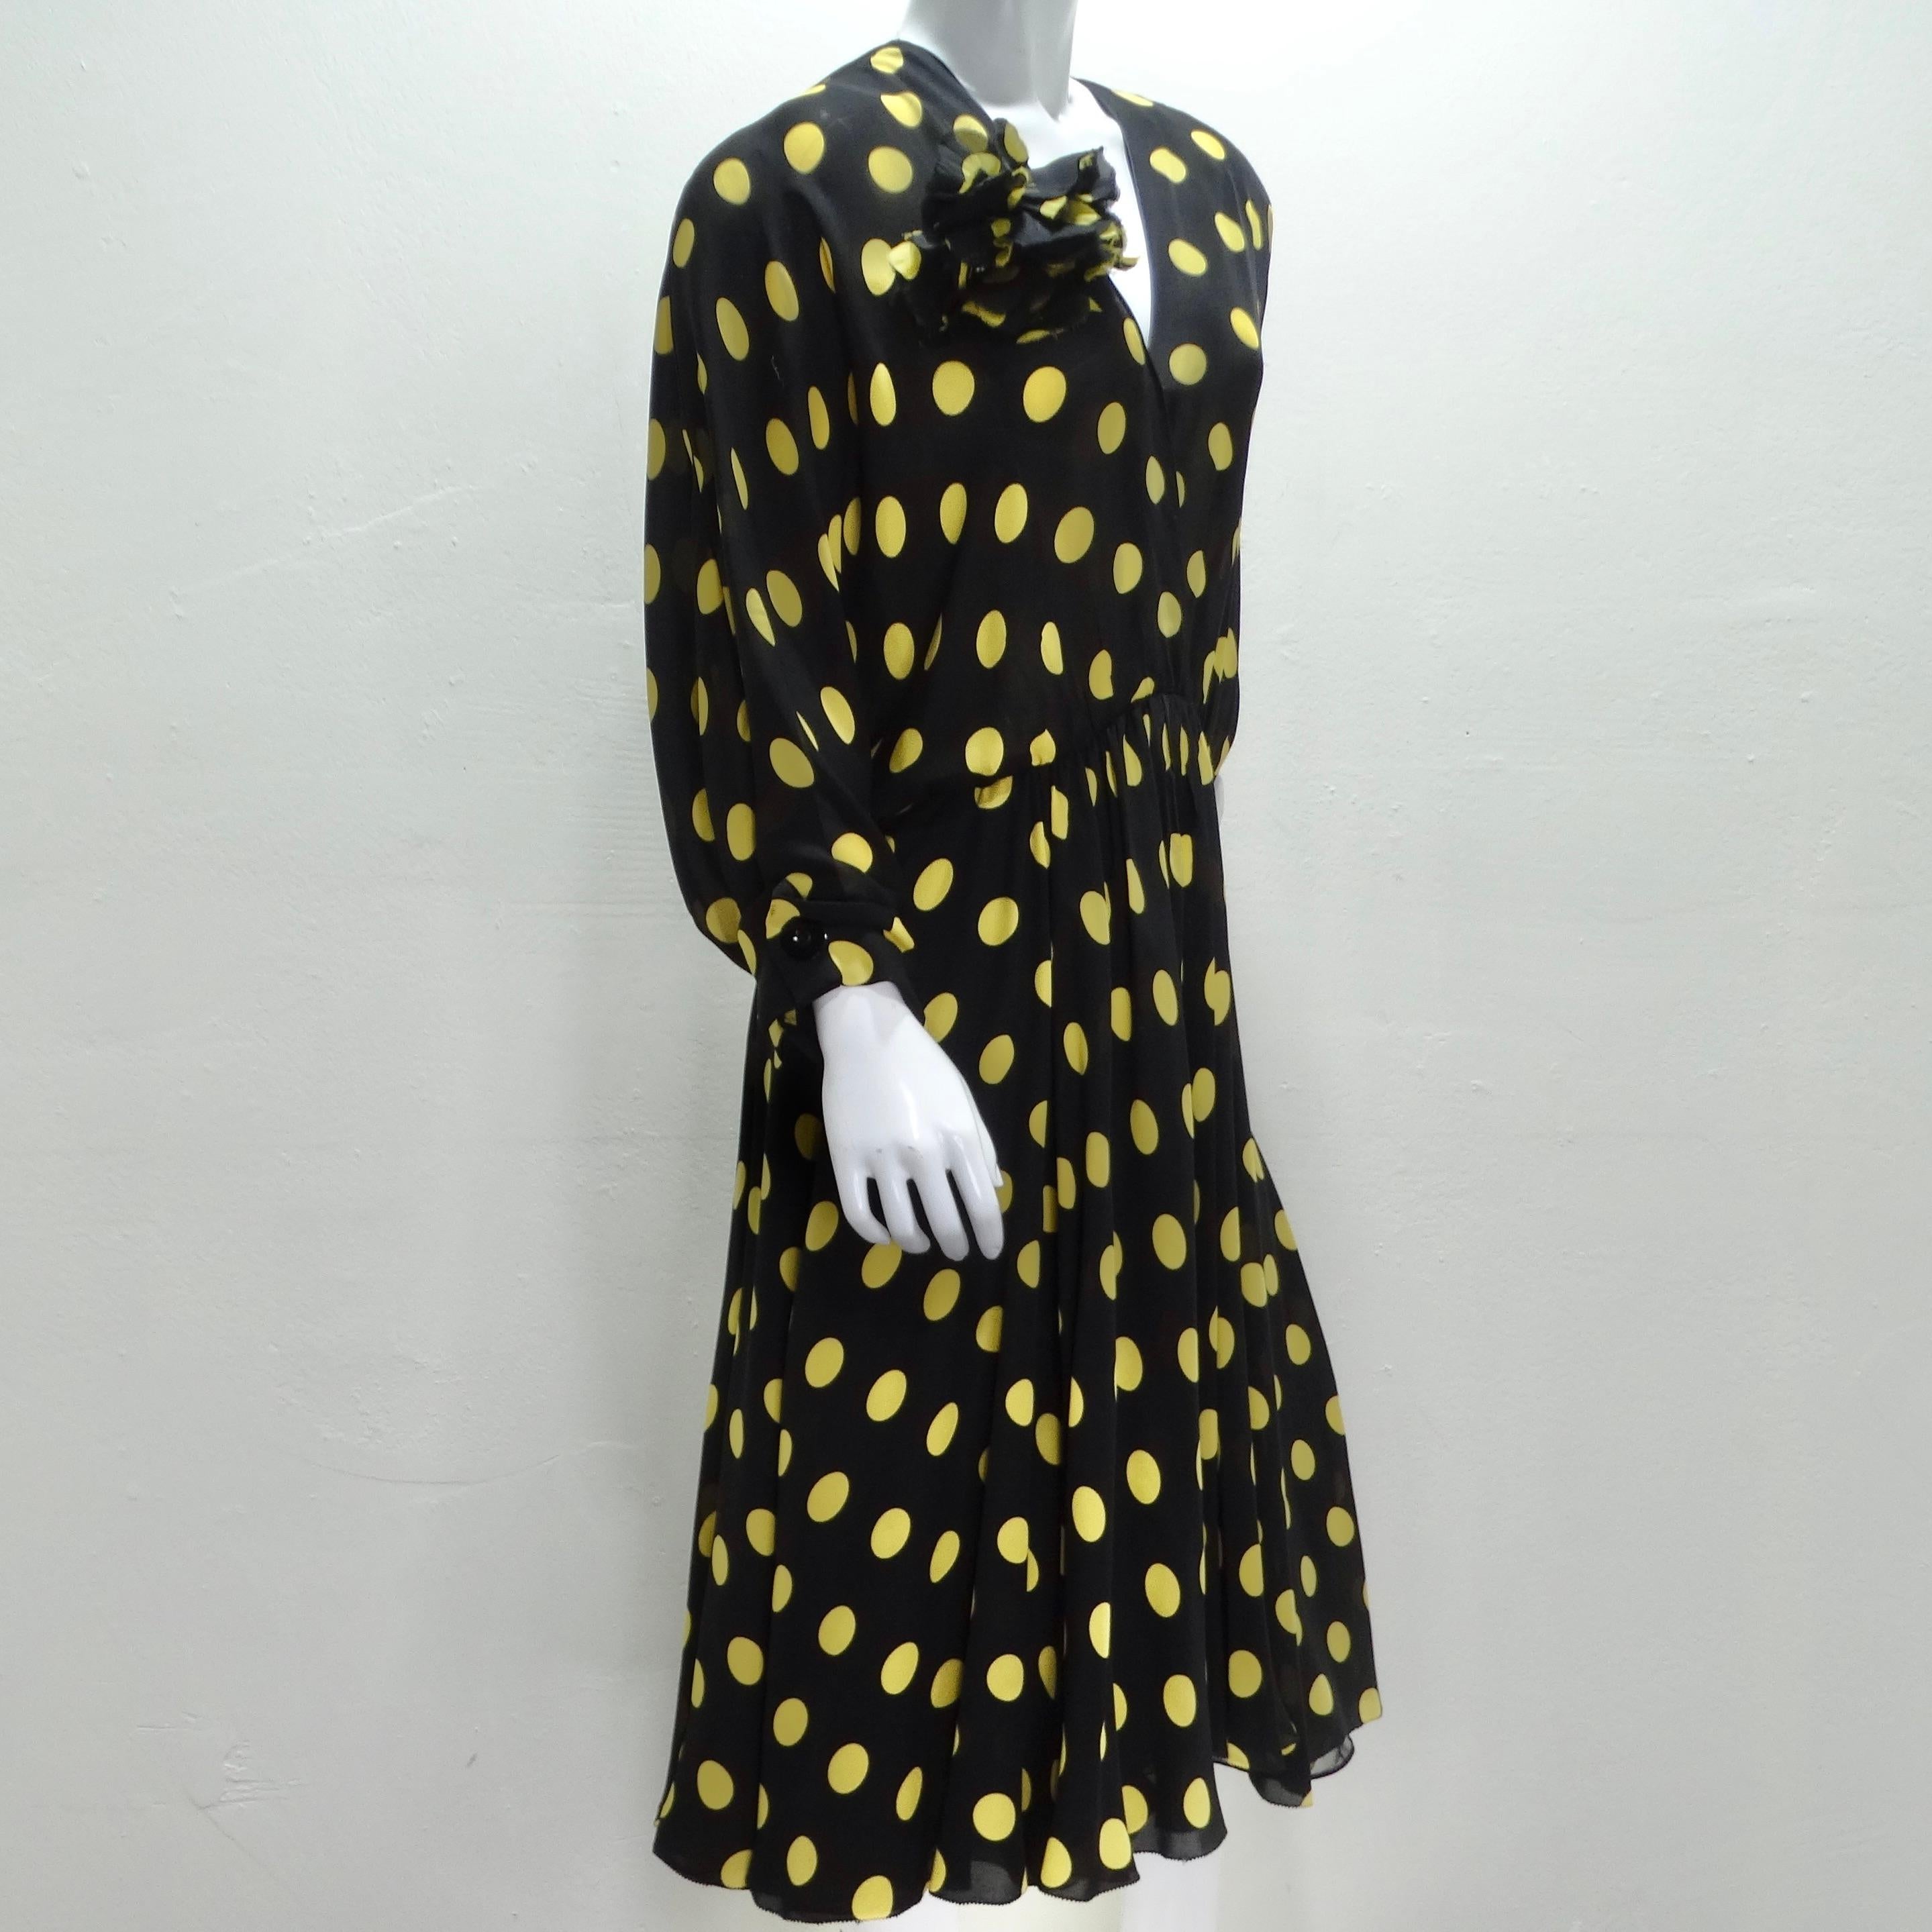 Make a Bold Statement with the Yves Saint Laurent 1980s Polka Dot Dress & Brooch Set! Introducing a striking ensemble from the 1980s, the Yves Saint Laurent Polka Dot Dress & Brooch Set. The black sheer fabric is adorned with large yellow polka